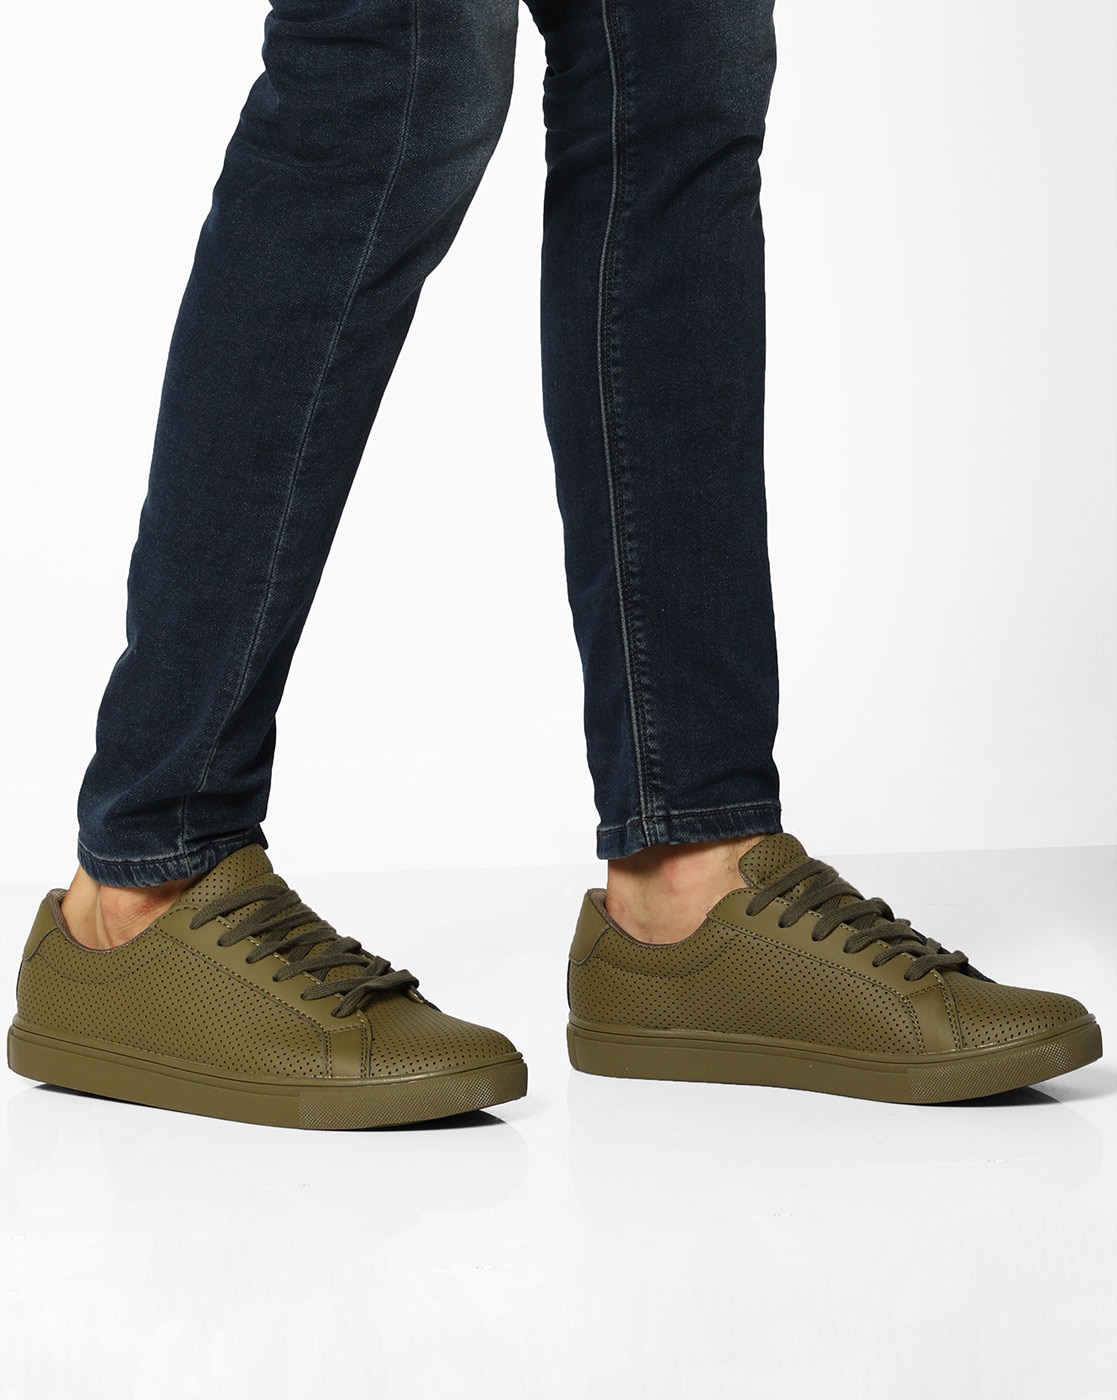 united colors of benetton olive sneakers